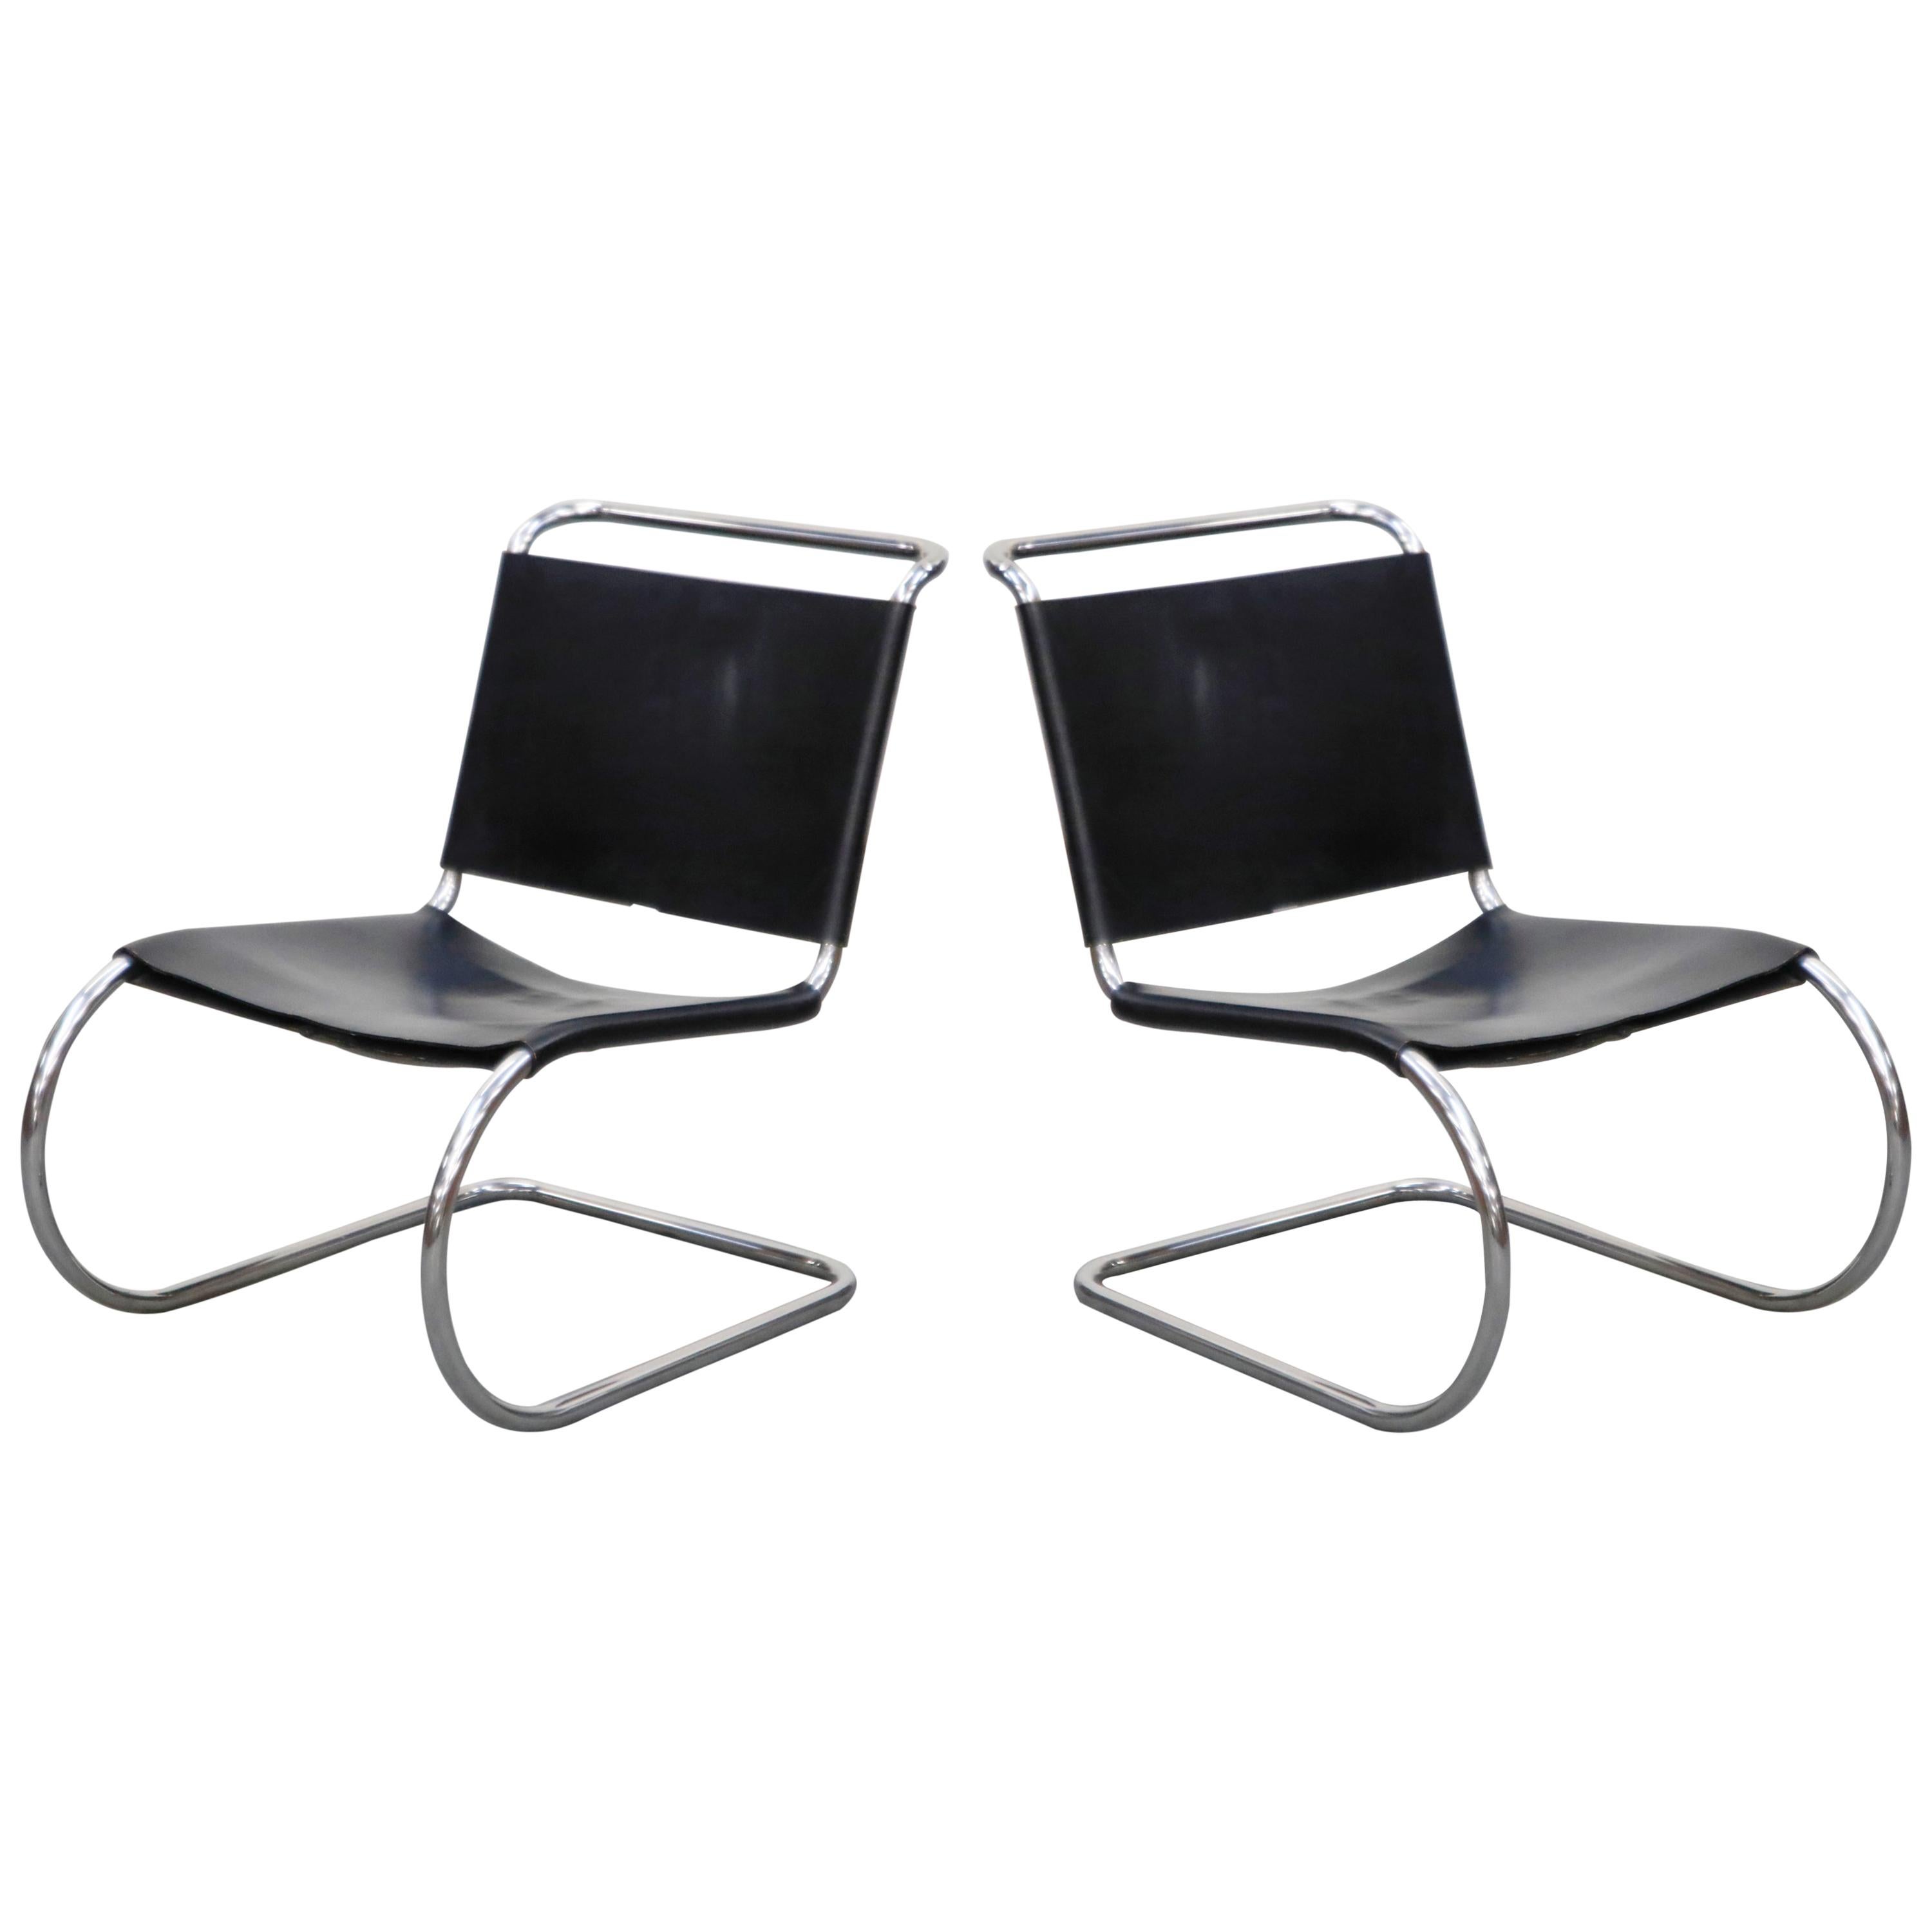 MR 30/5 Lounge Chairs by Mies van der Rohe for Knoll International, Signed Pair